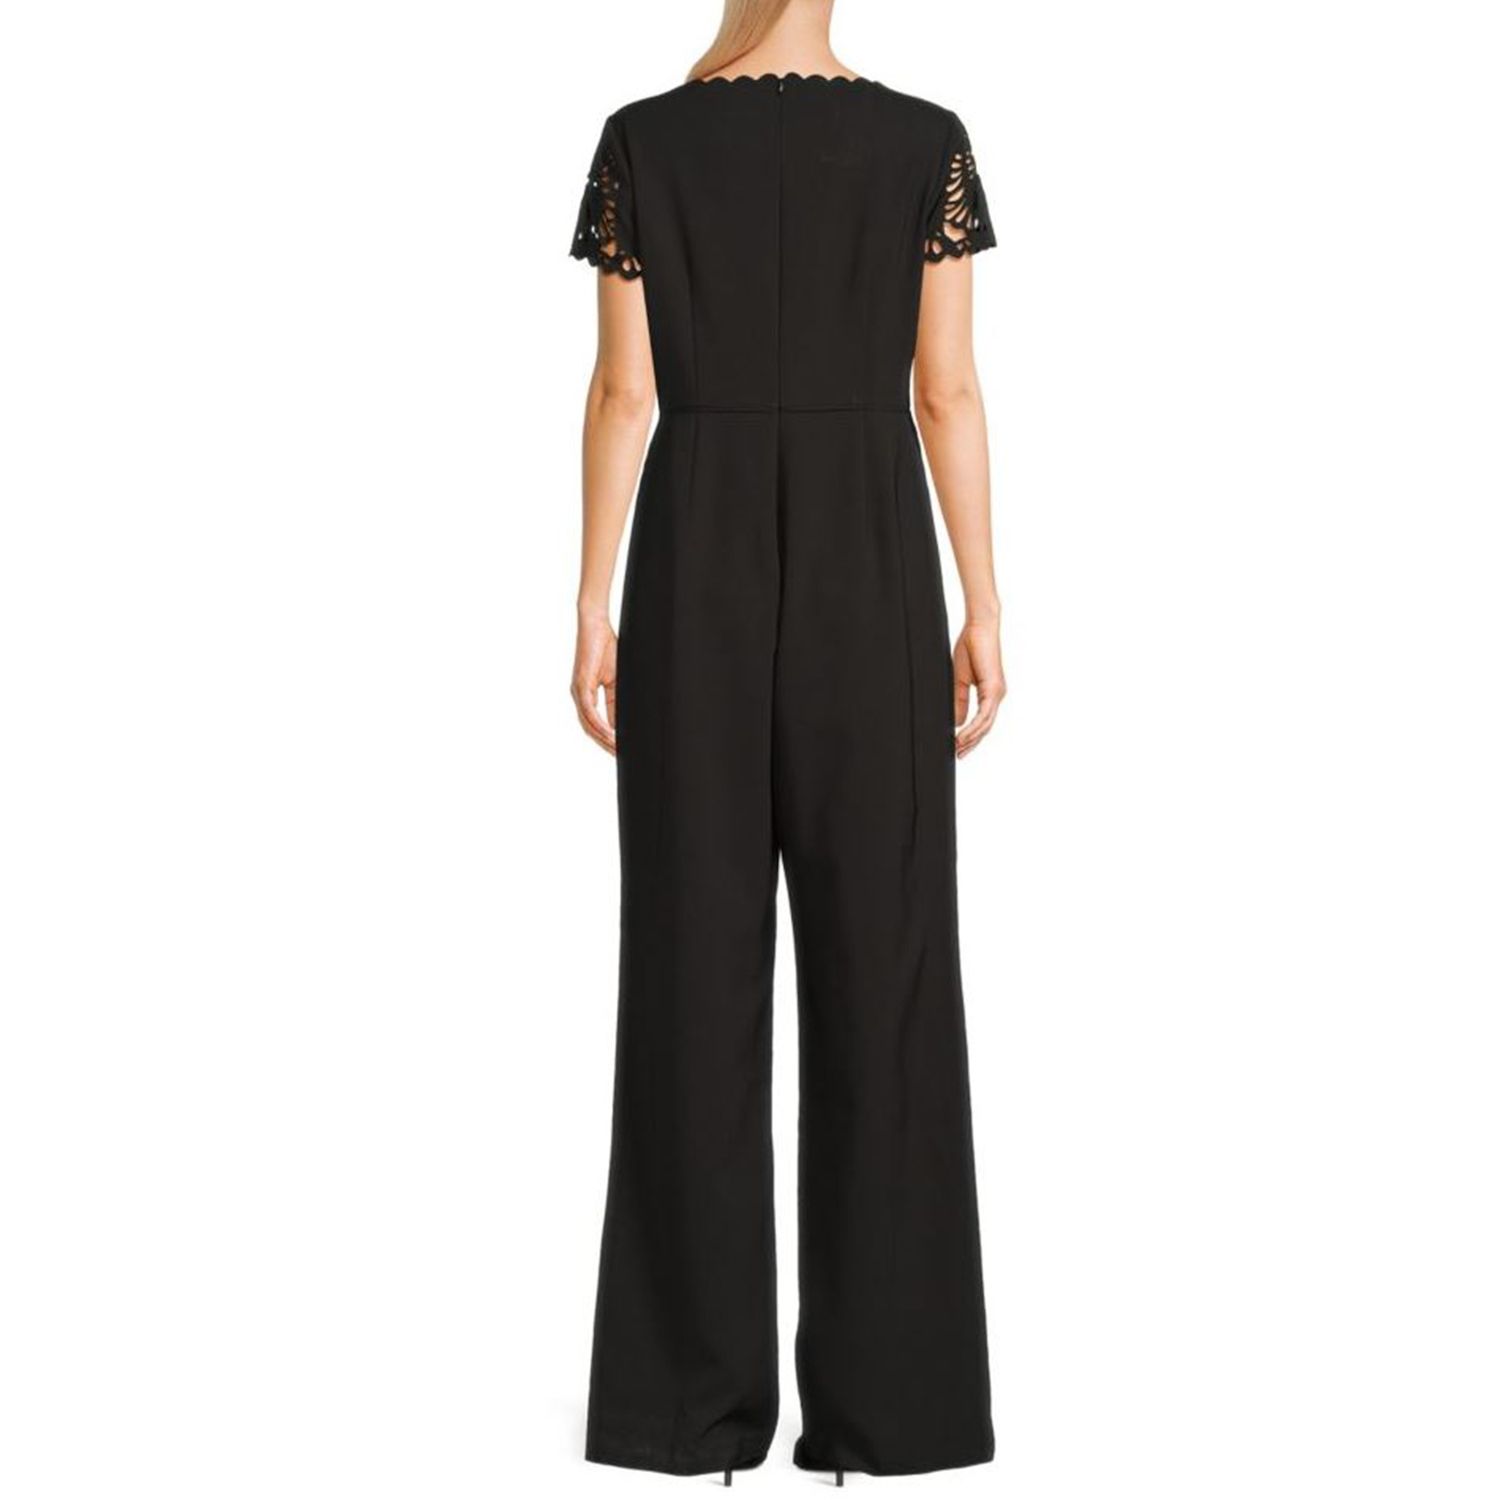 Womens Jumpsuits & Rompers Dressy Dresses, Clothing